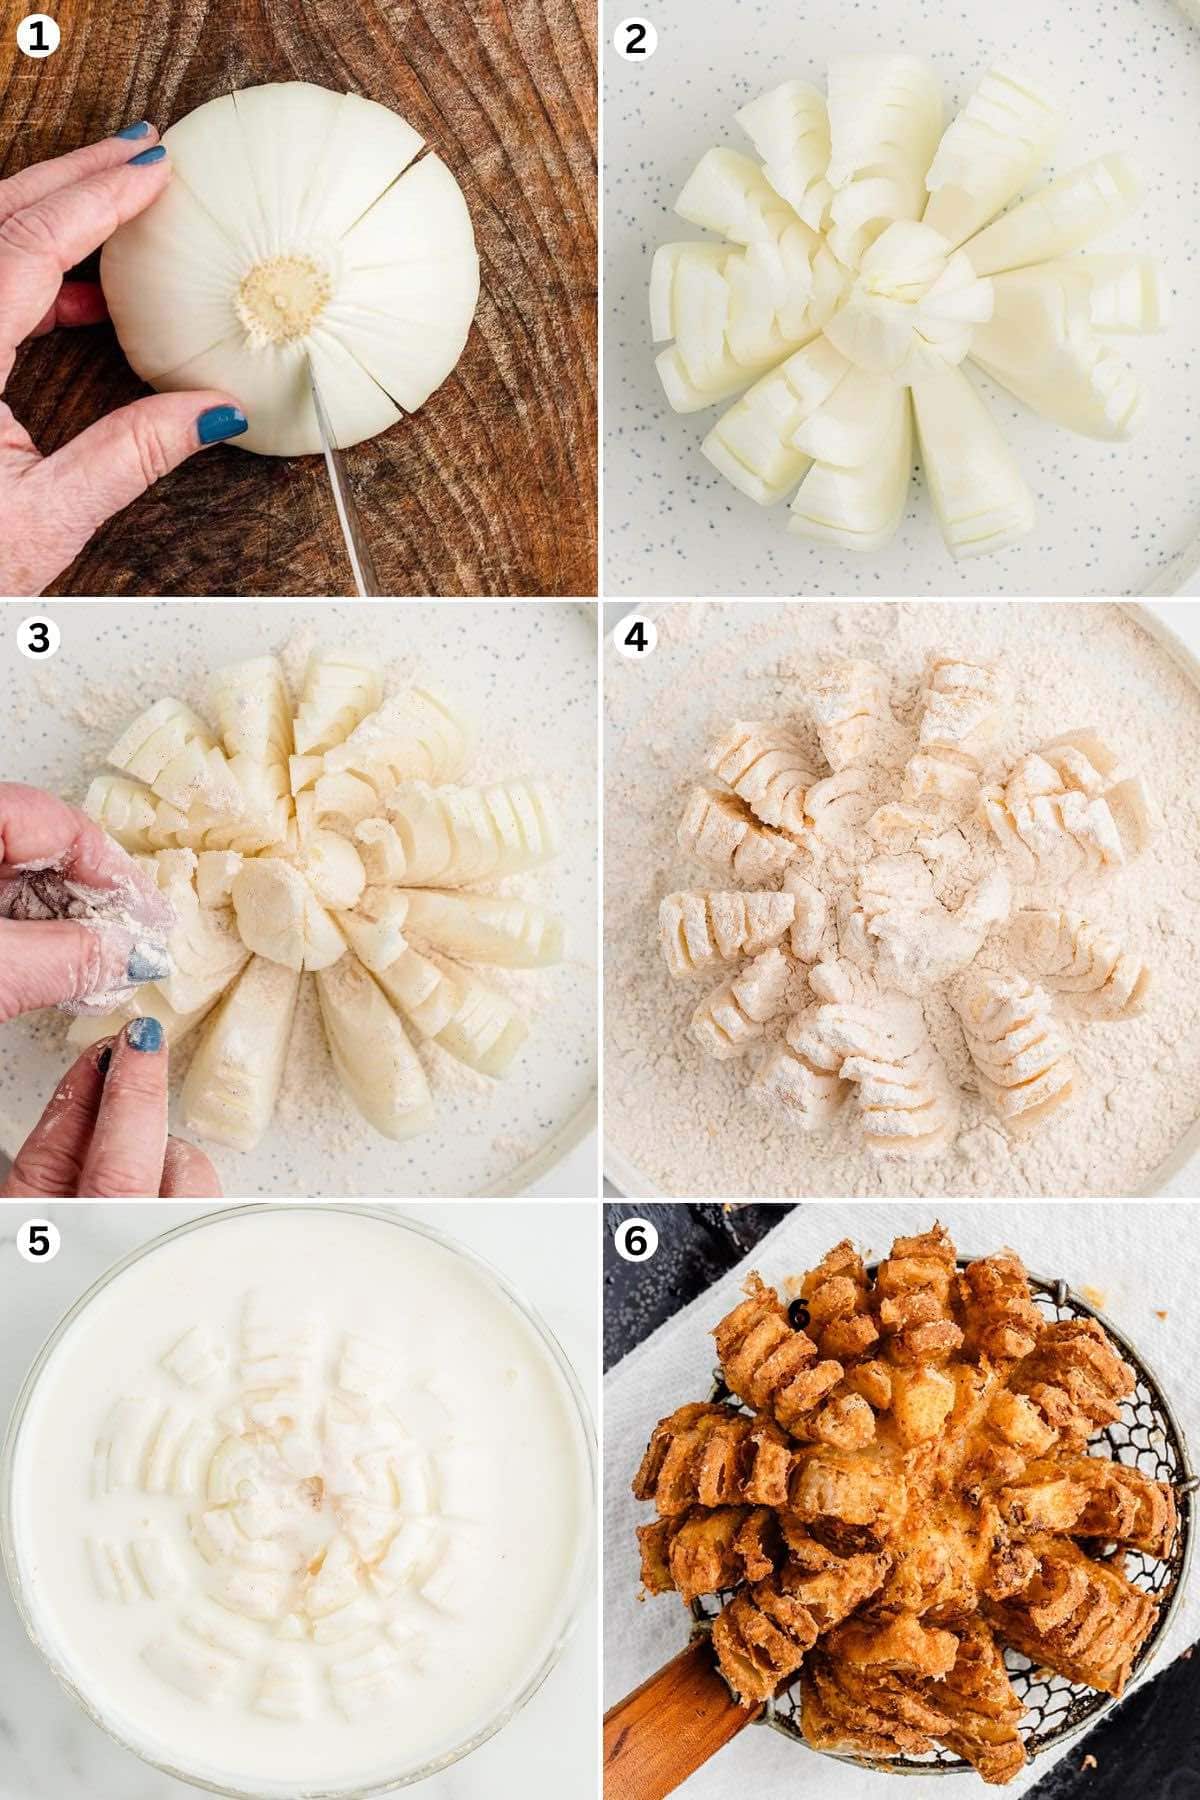 step 1. Cut the onion.
step 2. Open the cut onion to create the bloomed effect.
step 3 and step 4. Using your hands, sprinkle up to ¼ cup of the flour over the entire surface of the onion.
step 5. Dip the onion into the bowl of buttermilk.
step 6. Cook until golden brown.